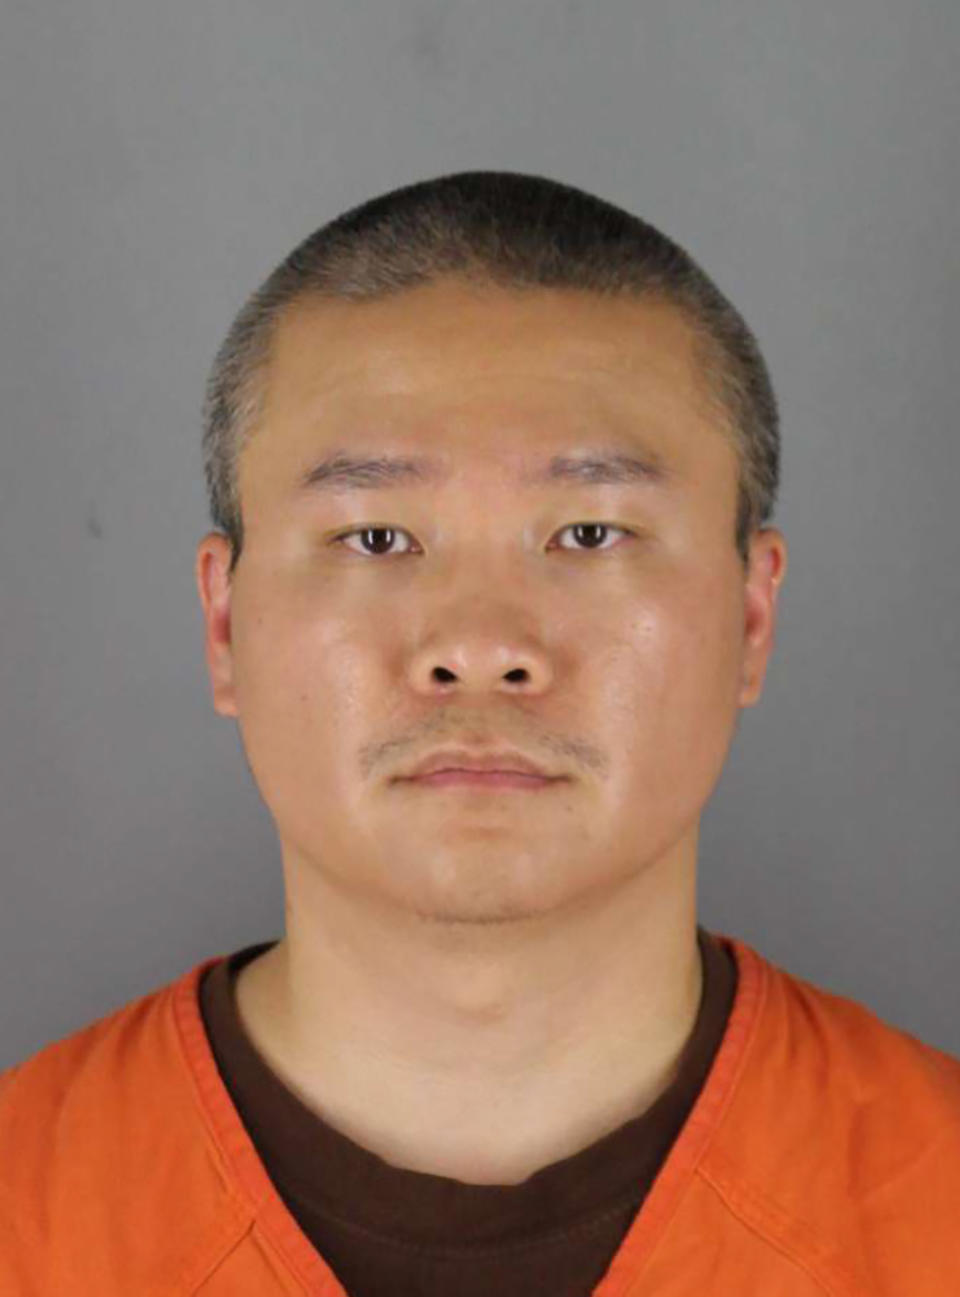 FILE - This photo provided by the Hennepin County Sheriff's Office in Minnesota on June 3, 2020, shows former Minneapolis police officer Tou Thao. Thao and two other Minneapolis police officers have been convicted of violating George Floyd’s civil rights when Officer Derek Chauvin pressed his knee into Floyd’s neck for 9 1/2 minutes as the 46-year-old Black man was handcuffed and facedown on the street on May 25, 2020. (Hennepin County Sheriff's Office via AP, File)